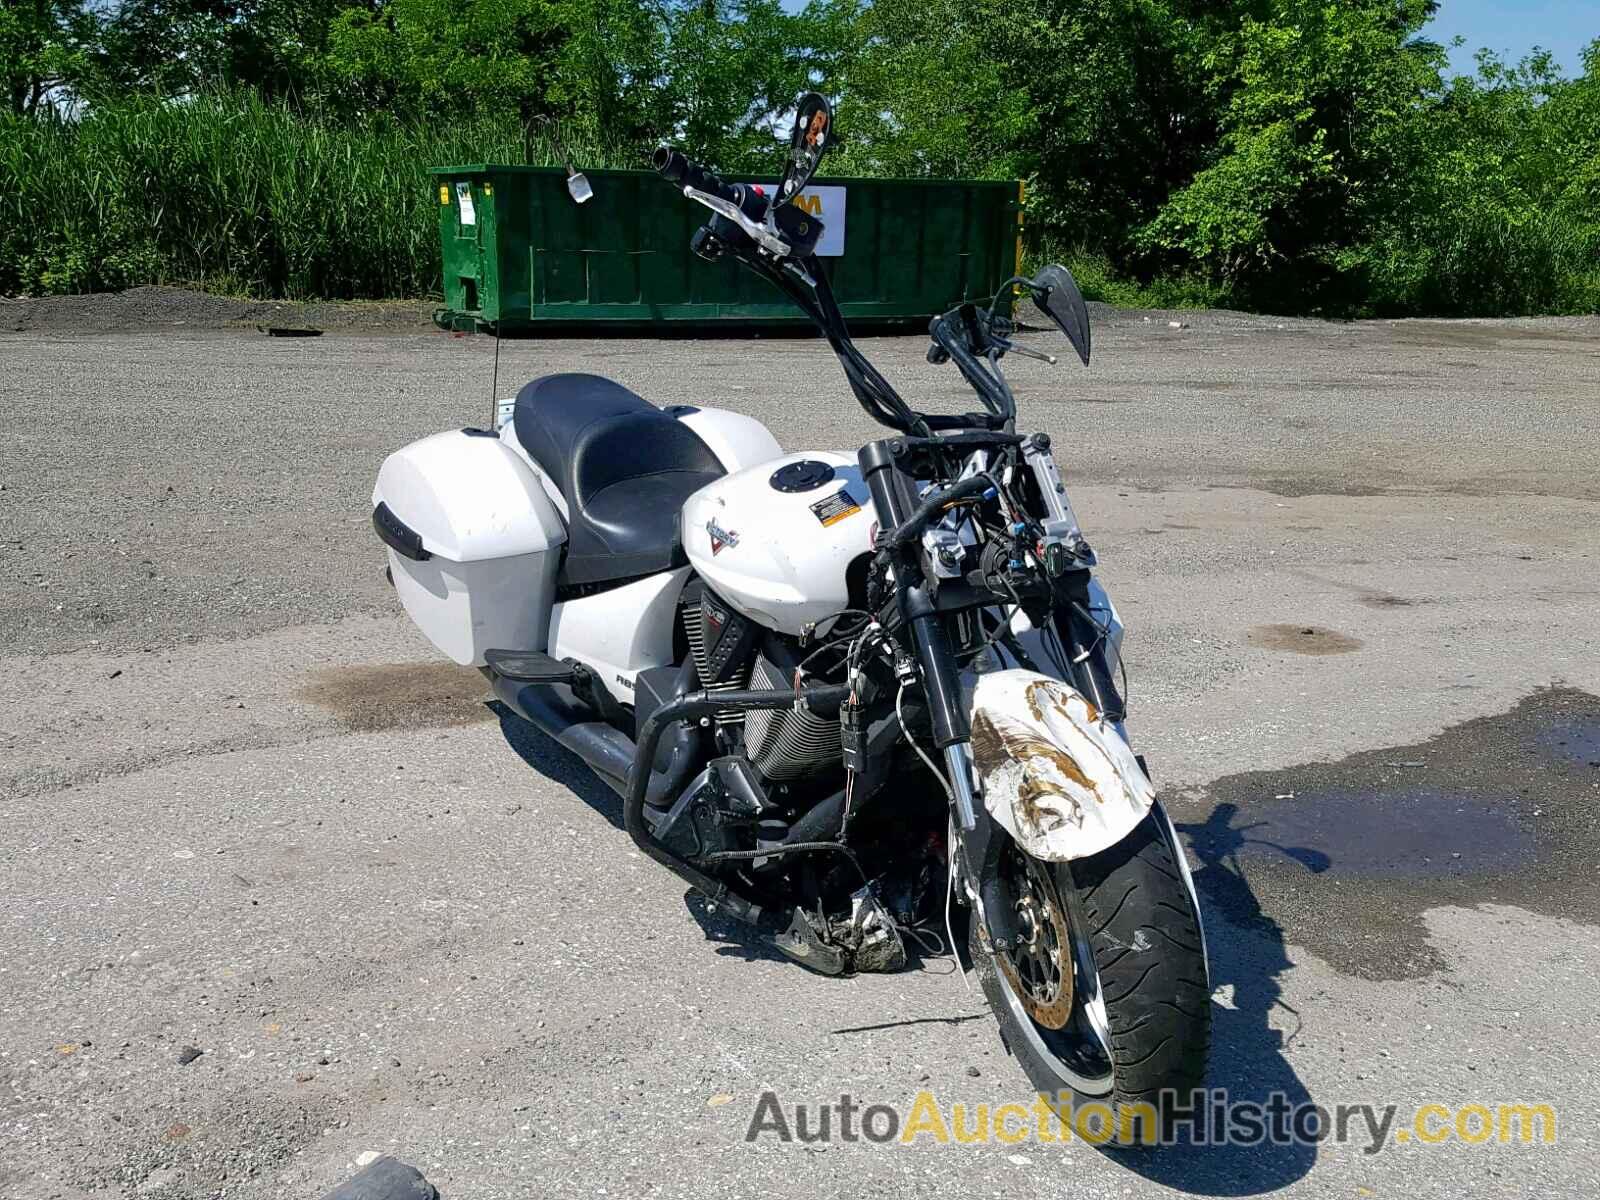 2014 VICTORY MOTORCYCLES CROSS COUNTRY, 5VPDW36N4E3032381